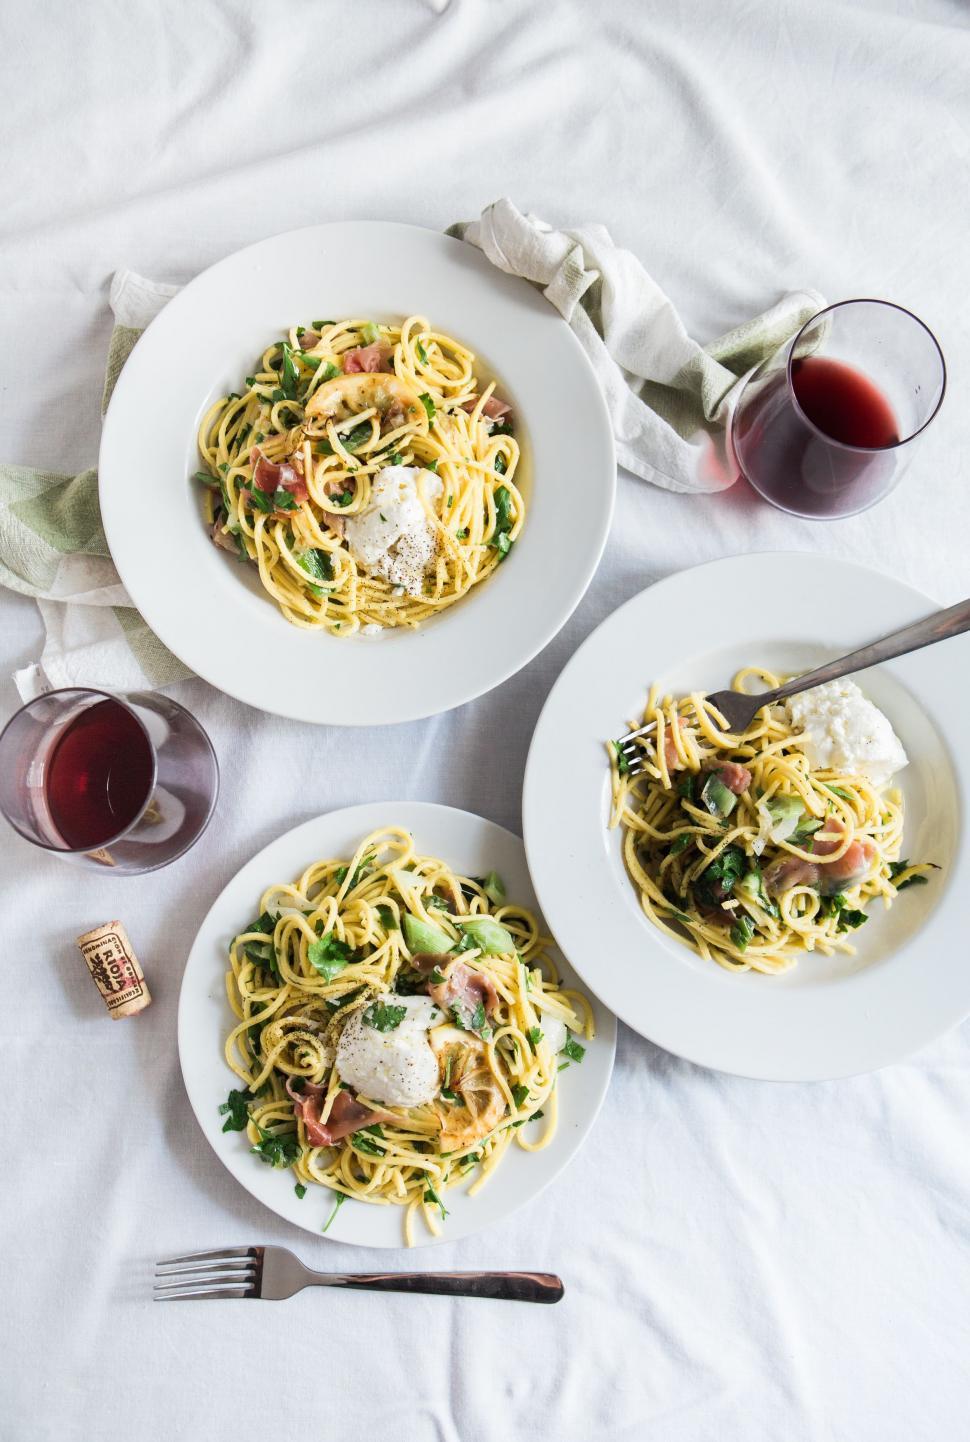 Free Image of Three Plates of Spaghetti and a Glass of Wine 